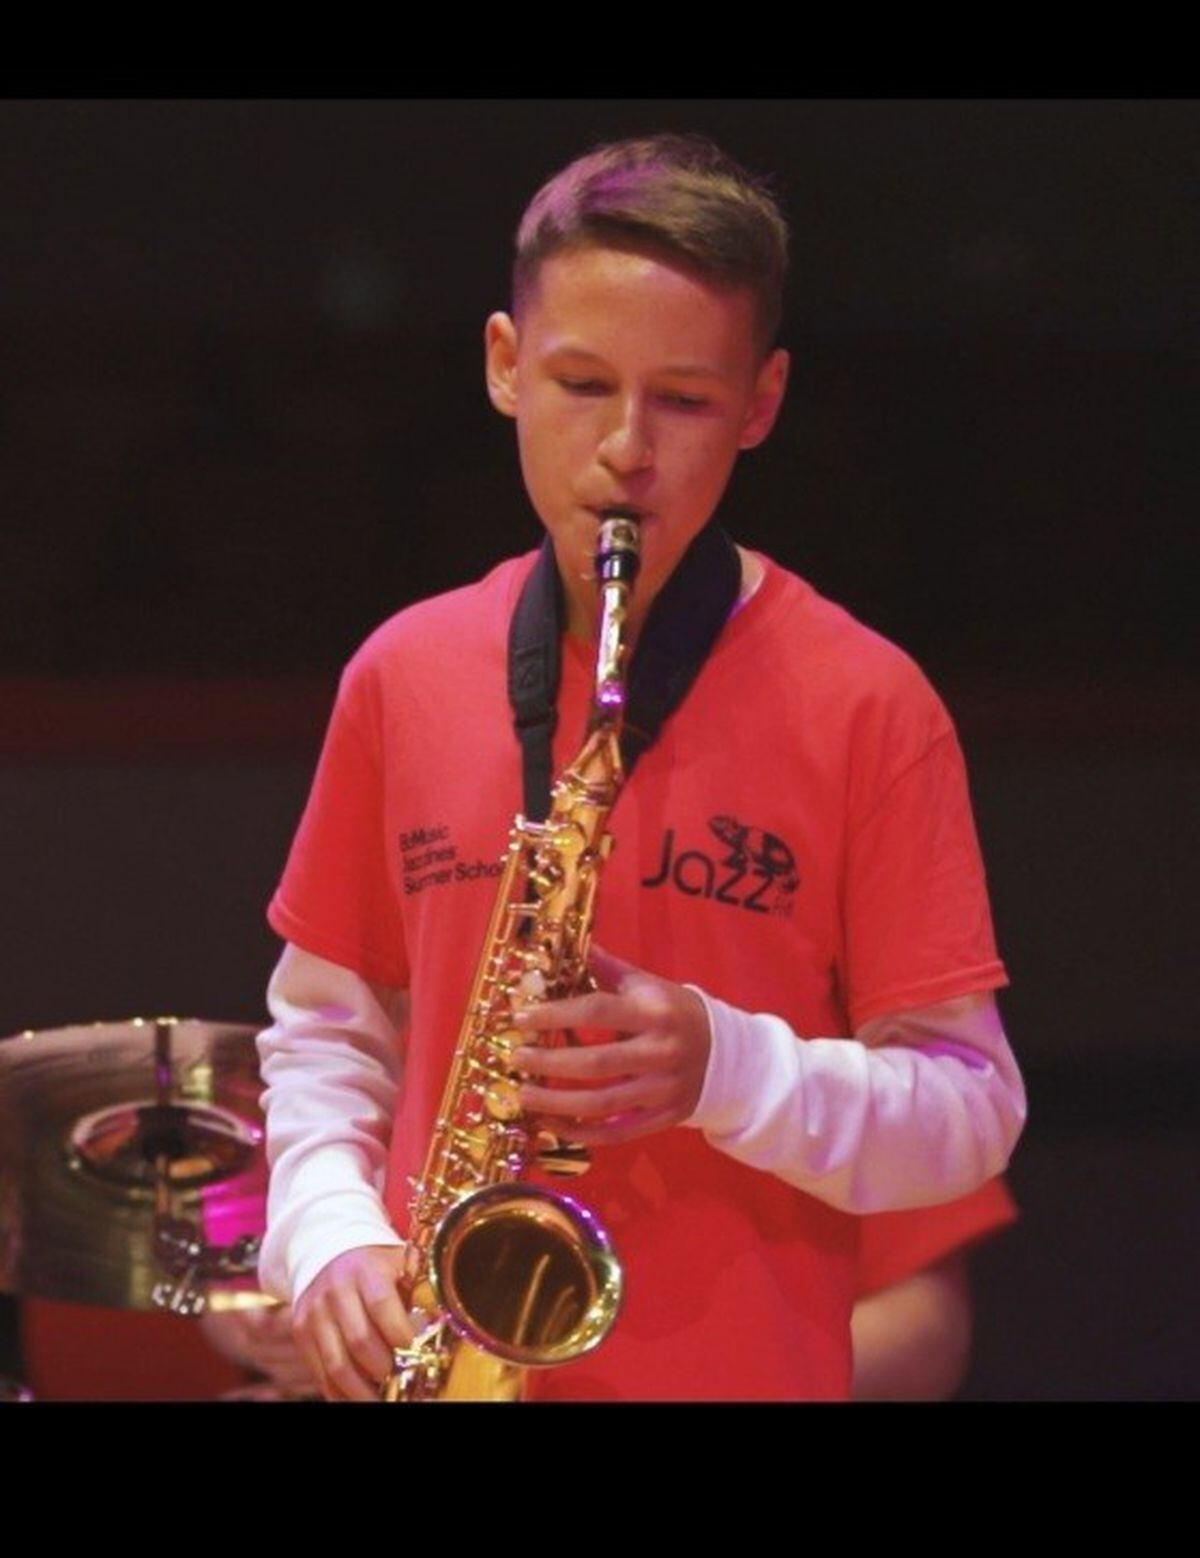 Louis also played saxophone - having reached grade 5